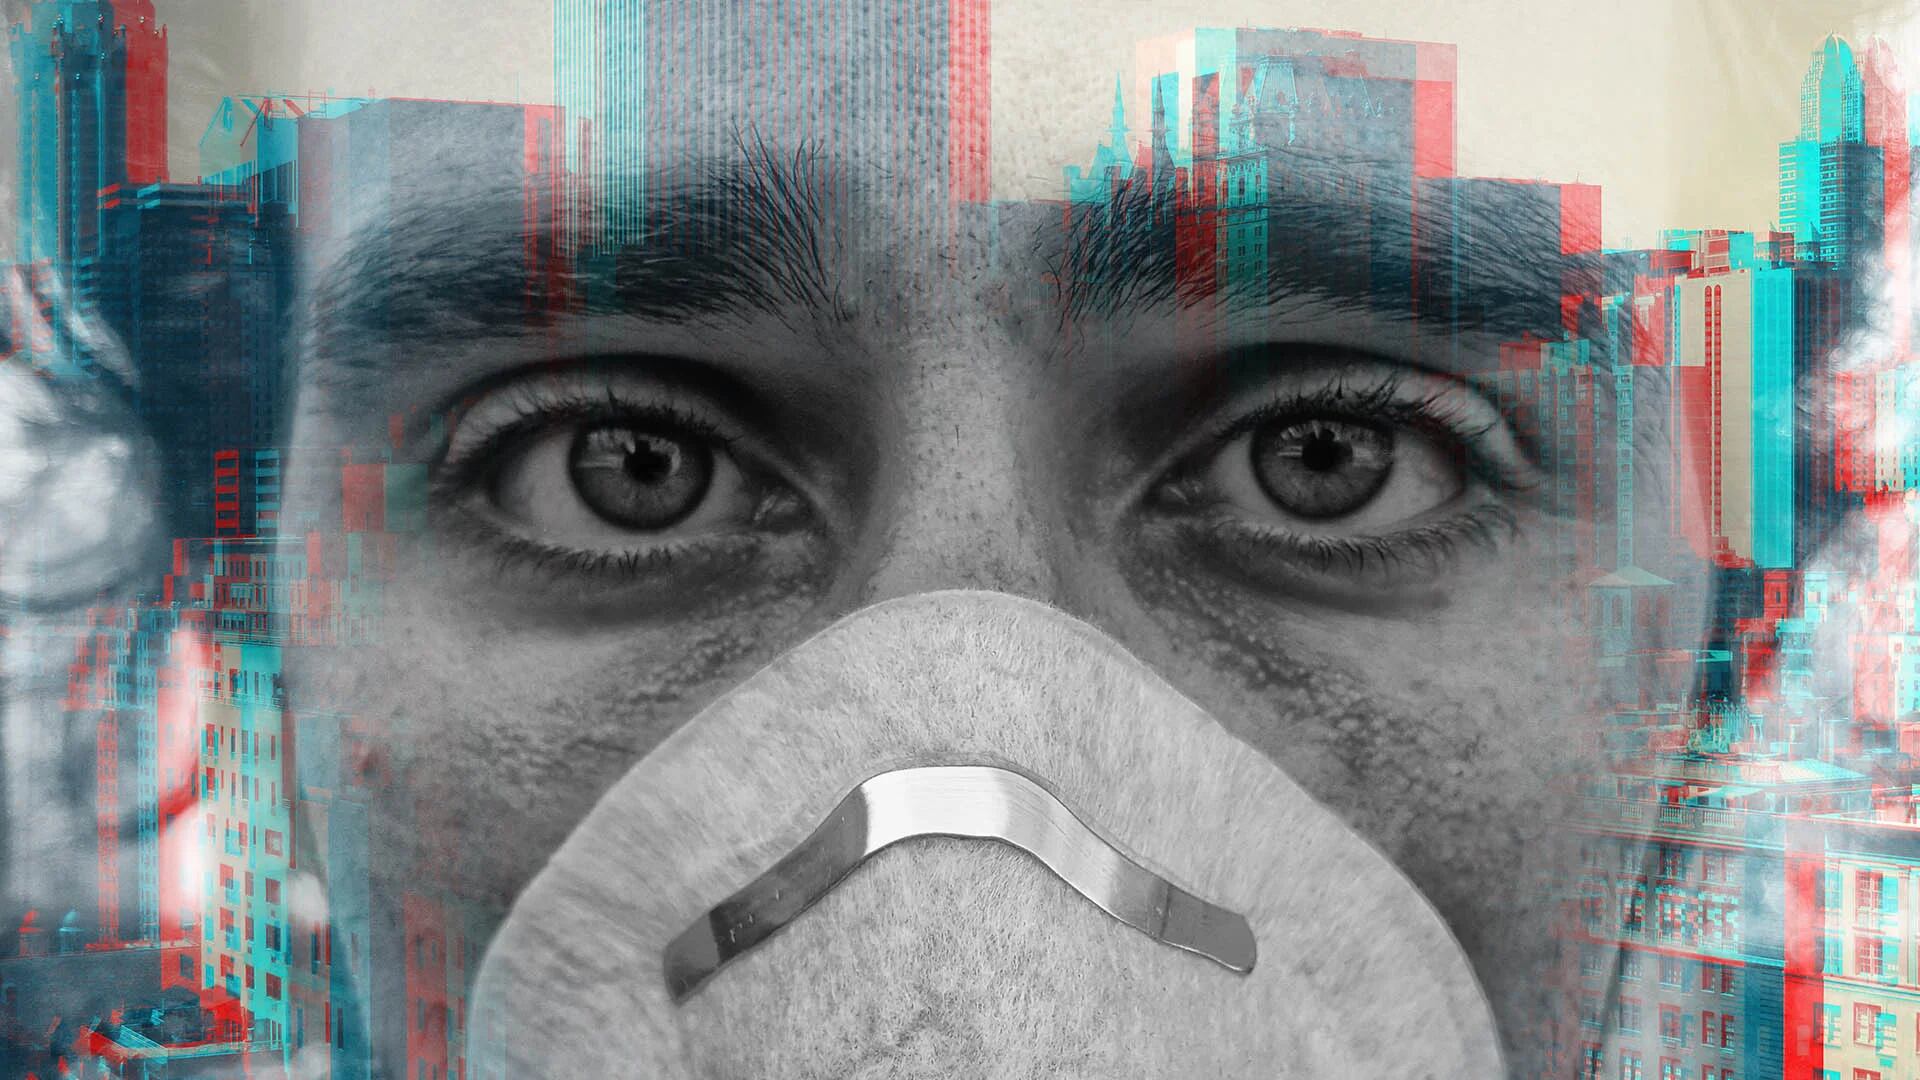 Double exposure portrait of face of young man wearing face mask against virus epidemic and a New York City skyline